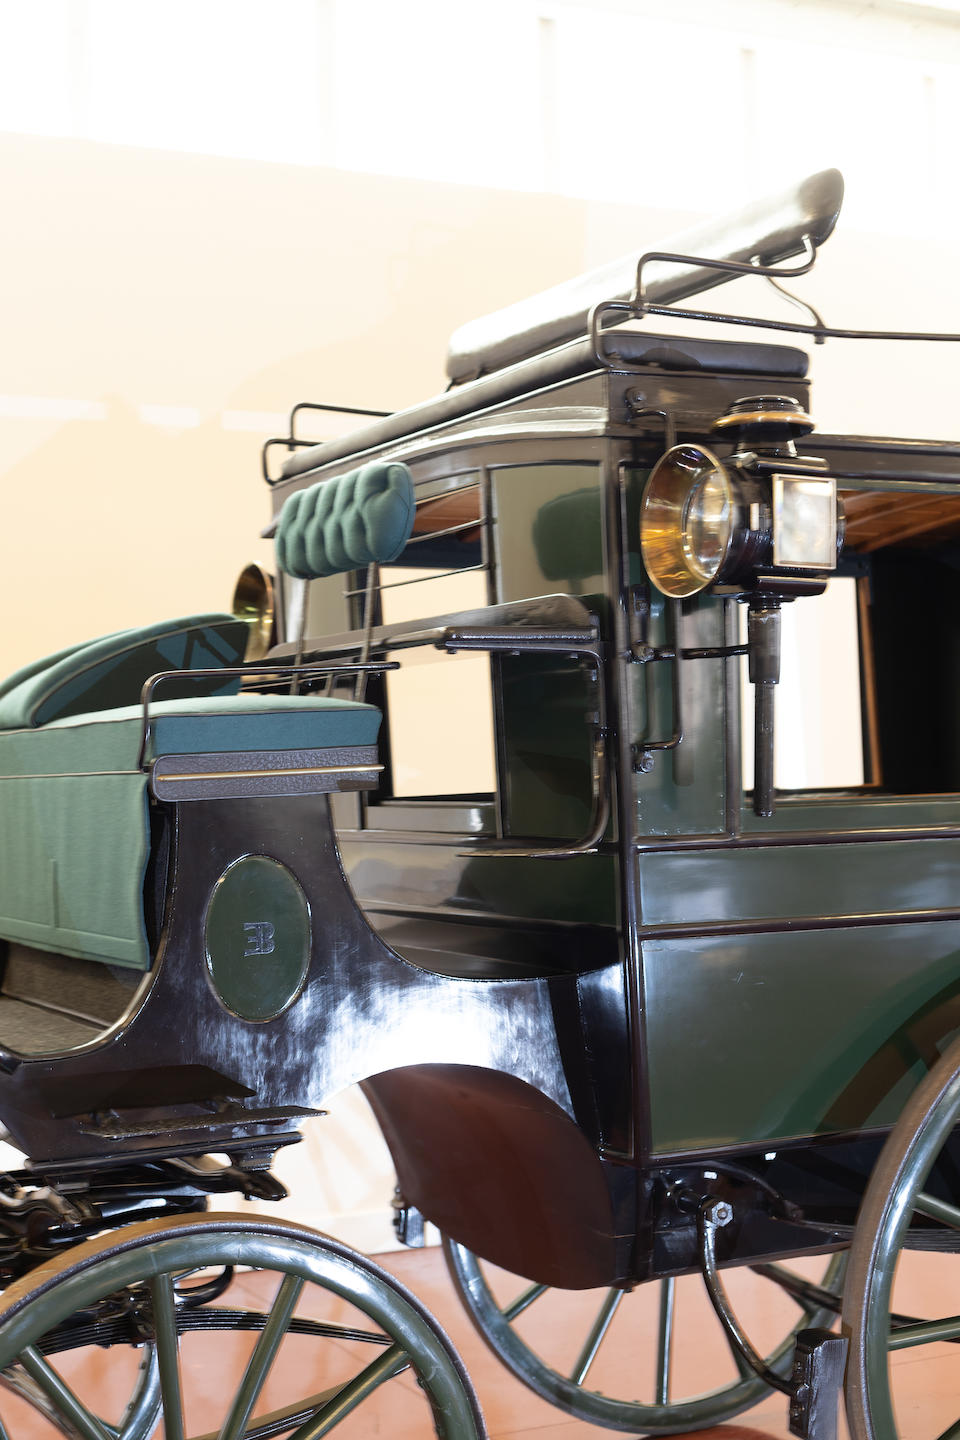 <i>Formerly in the collection of Baron Casier and believed to have been owned by Ettore Bugatti</i><br />A Private Omnibus by Million & Guiet<br /><br />Serial no. 3766